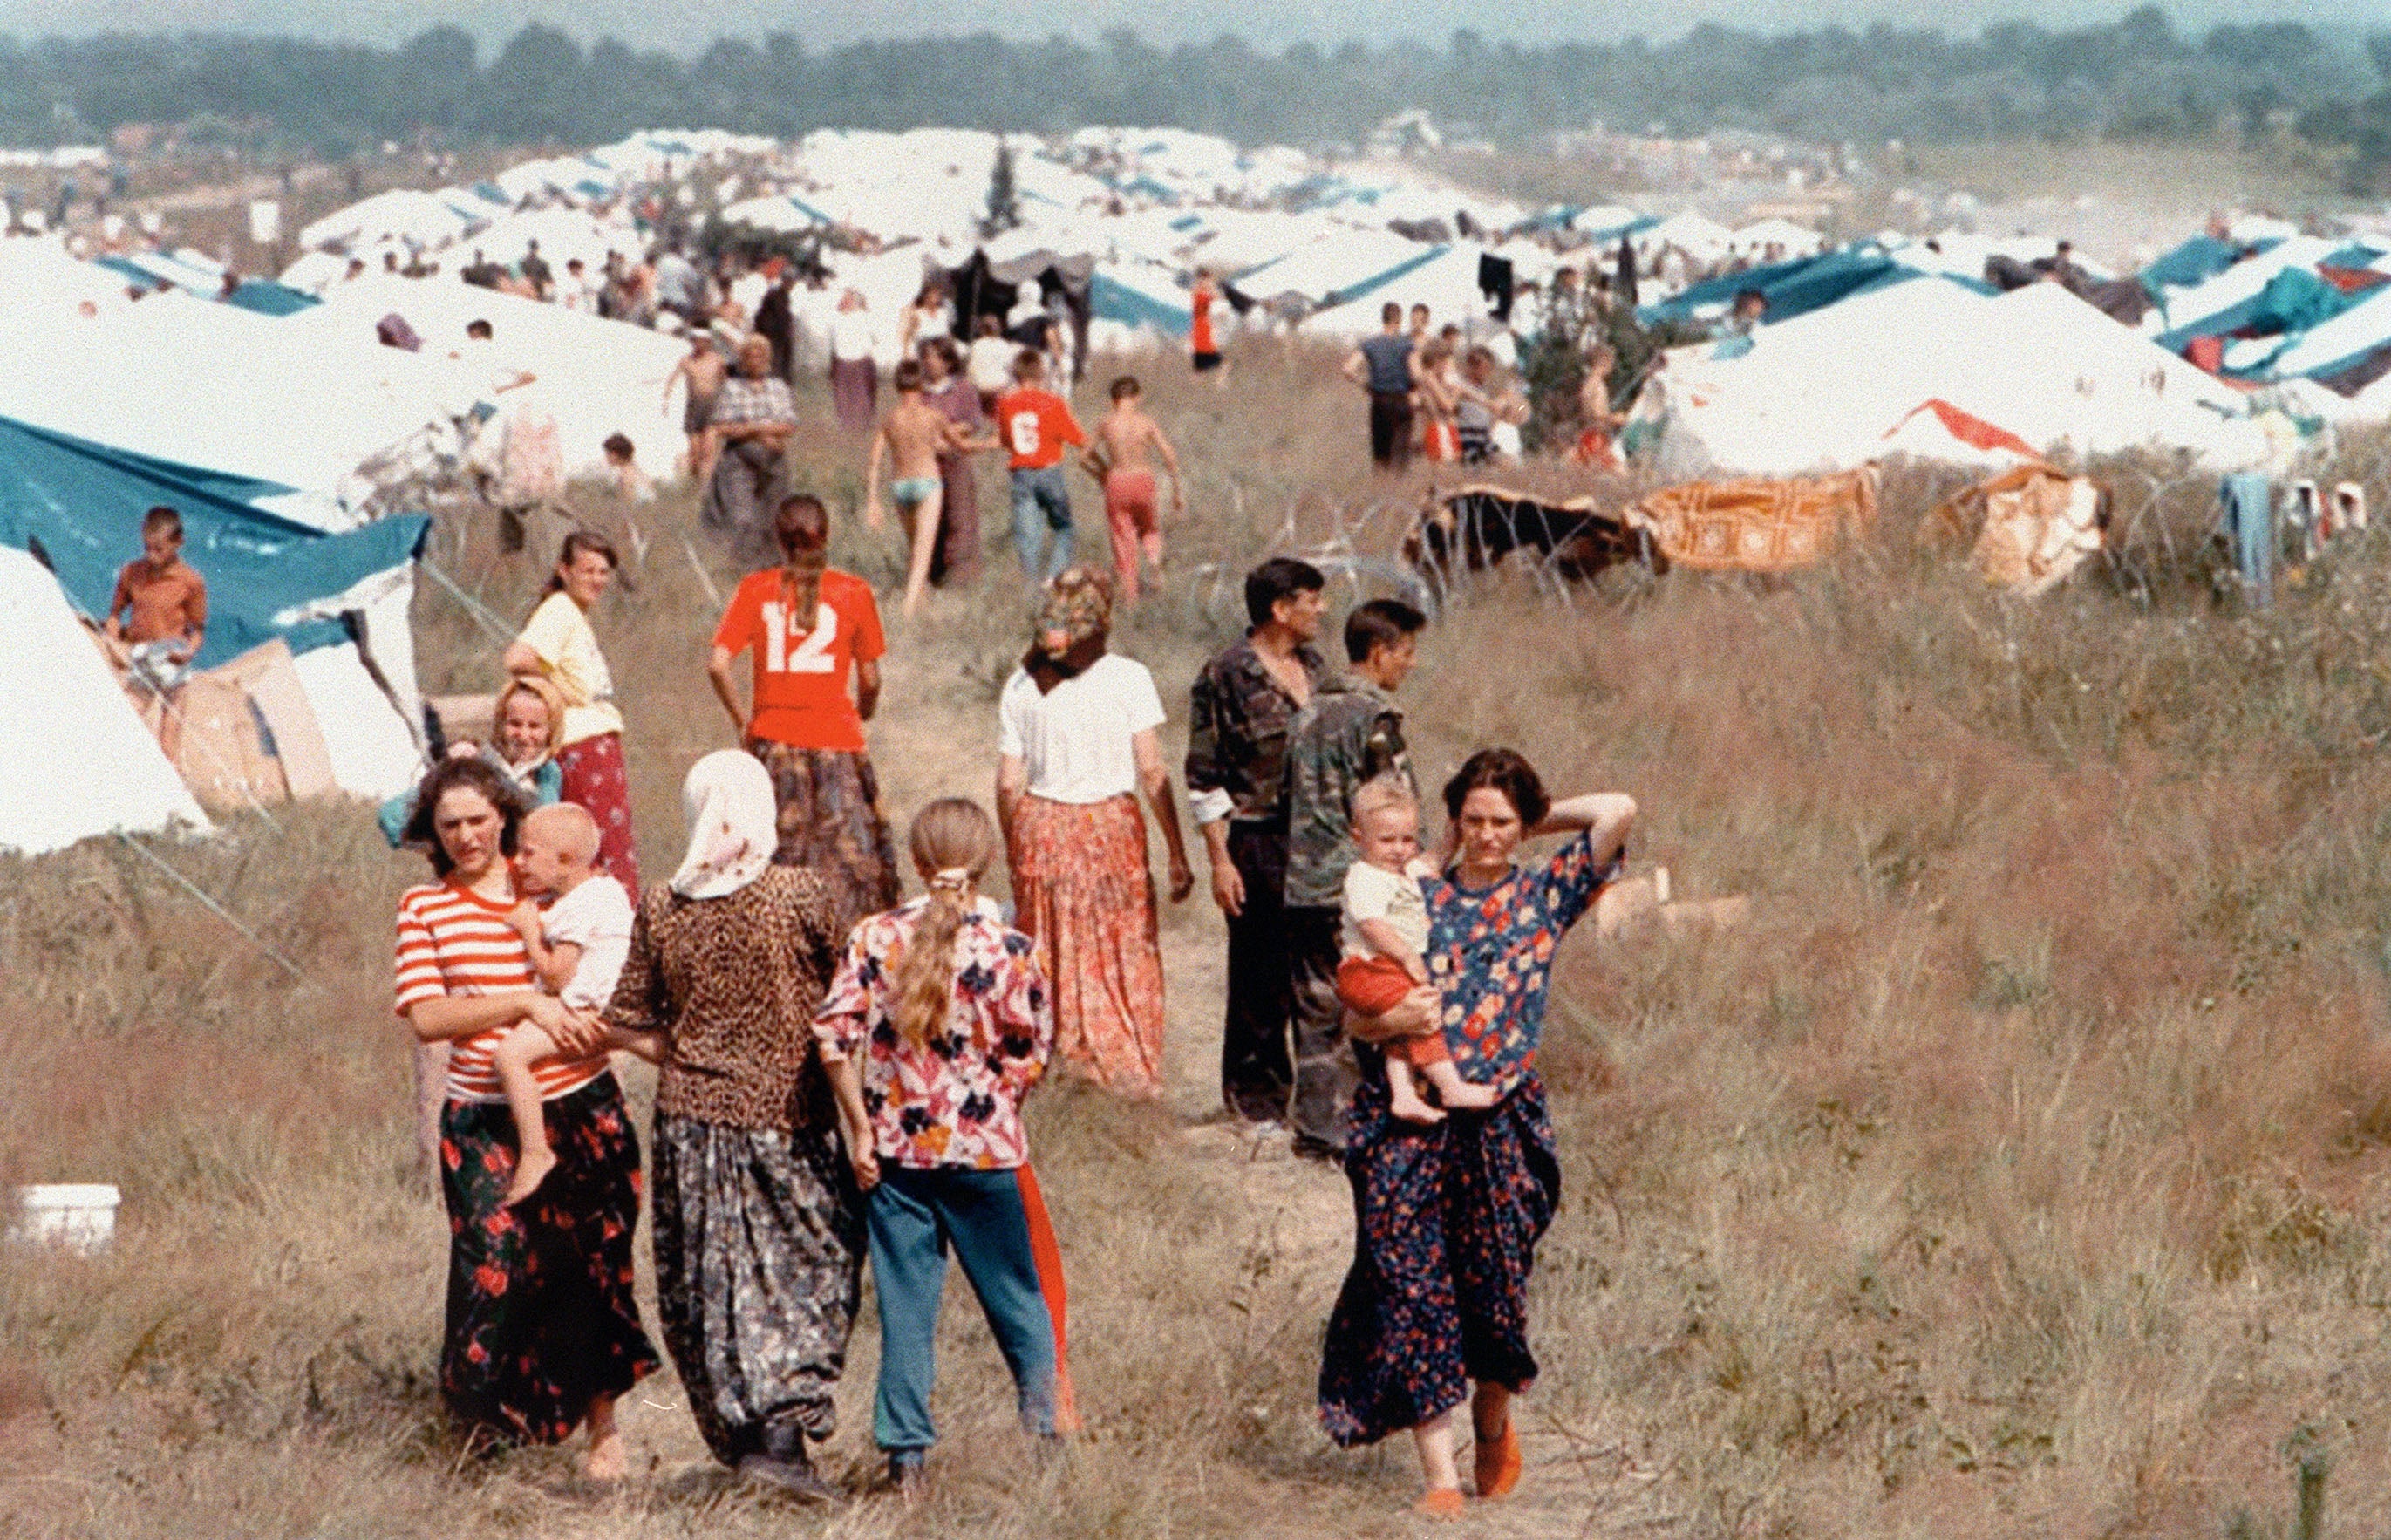 Refugees from the fallen Bosnian ‘safe area’ of Srebrenica, where more than 8,000 Bosniak Muslim men and boys were killed, at a camp set up by the UN in Tuzla, 15 July 1995